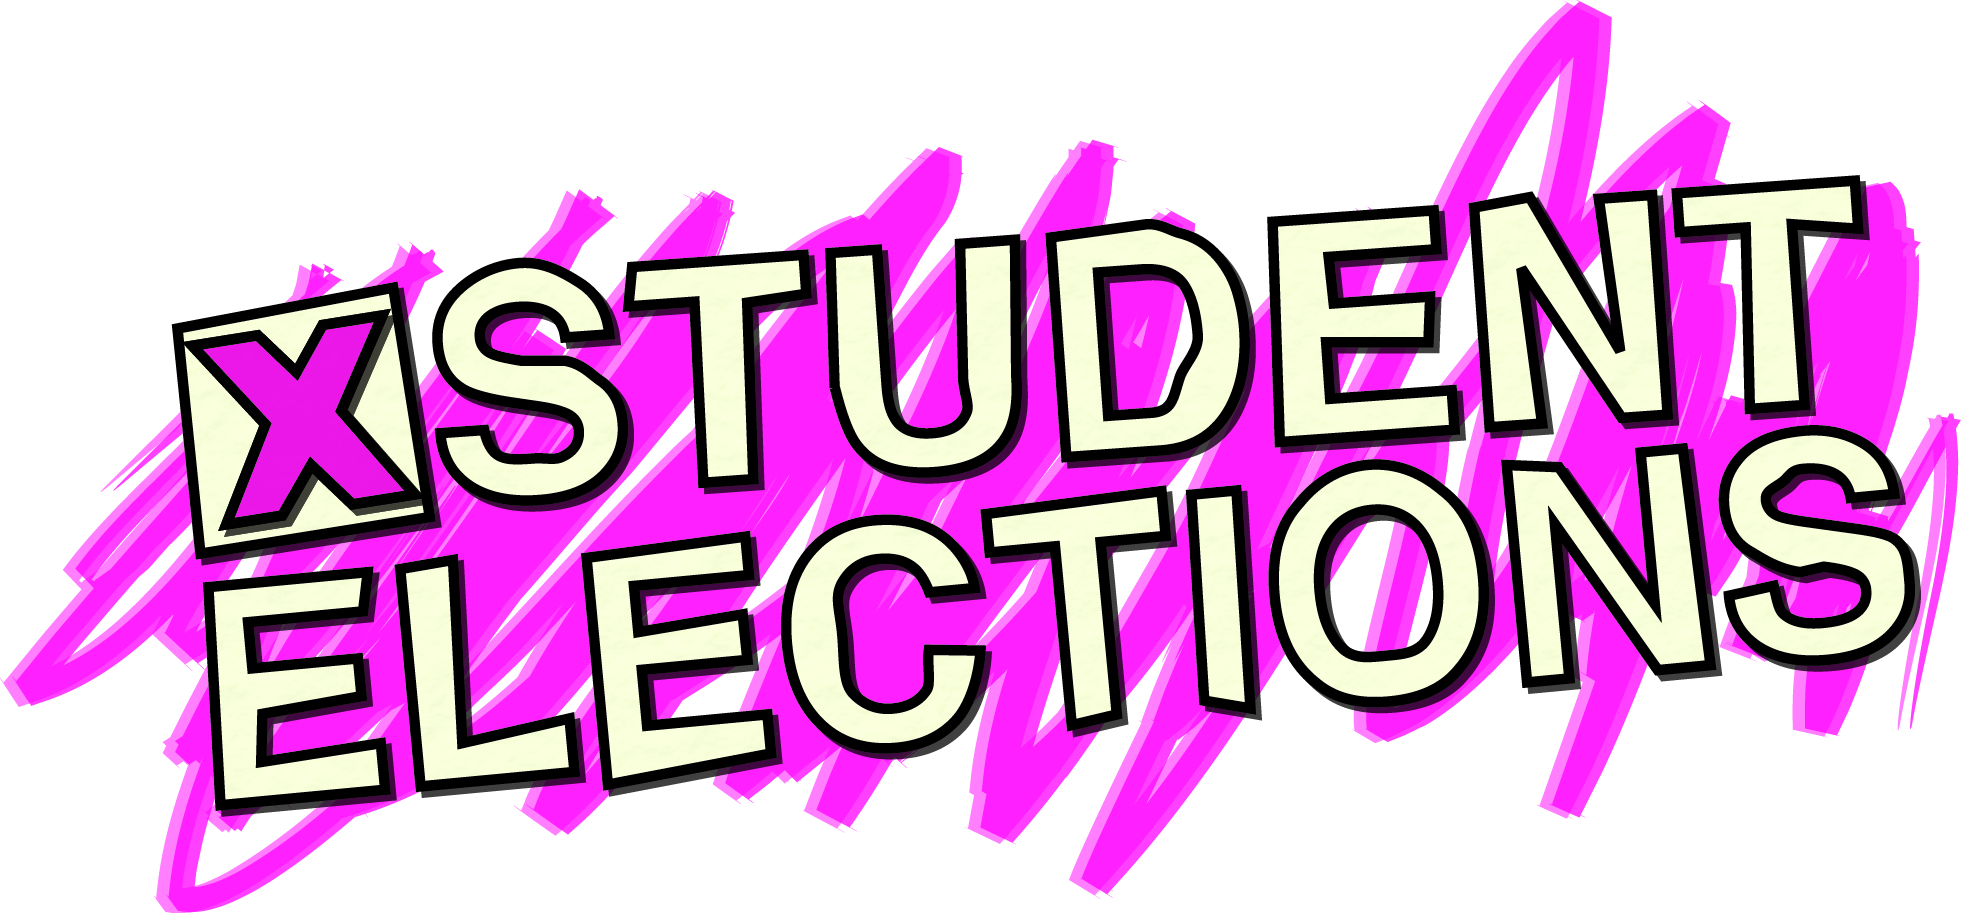 Student-Elections.jpg